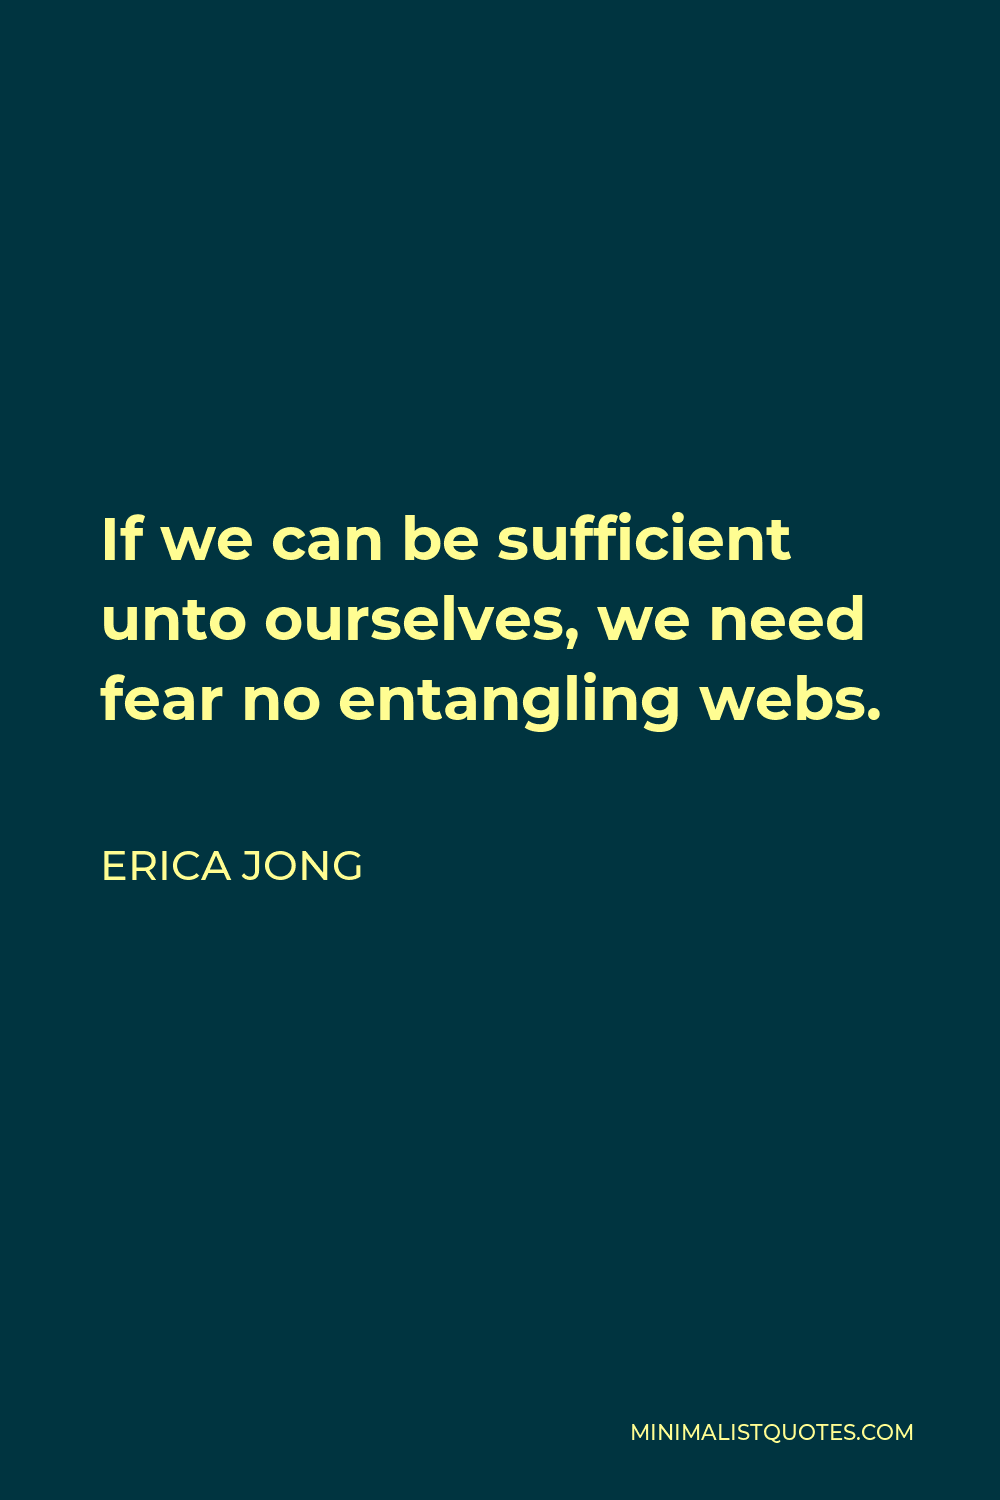 Erica Jong Quote - If we can be sufficient unto ourselves, we need fear no entangling webs.